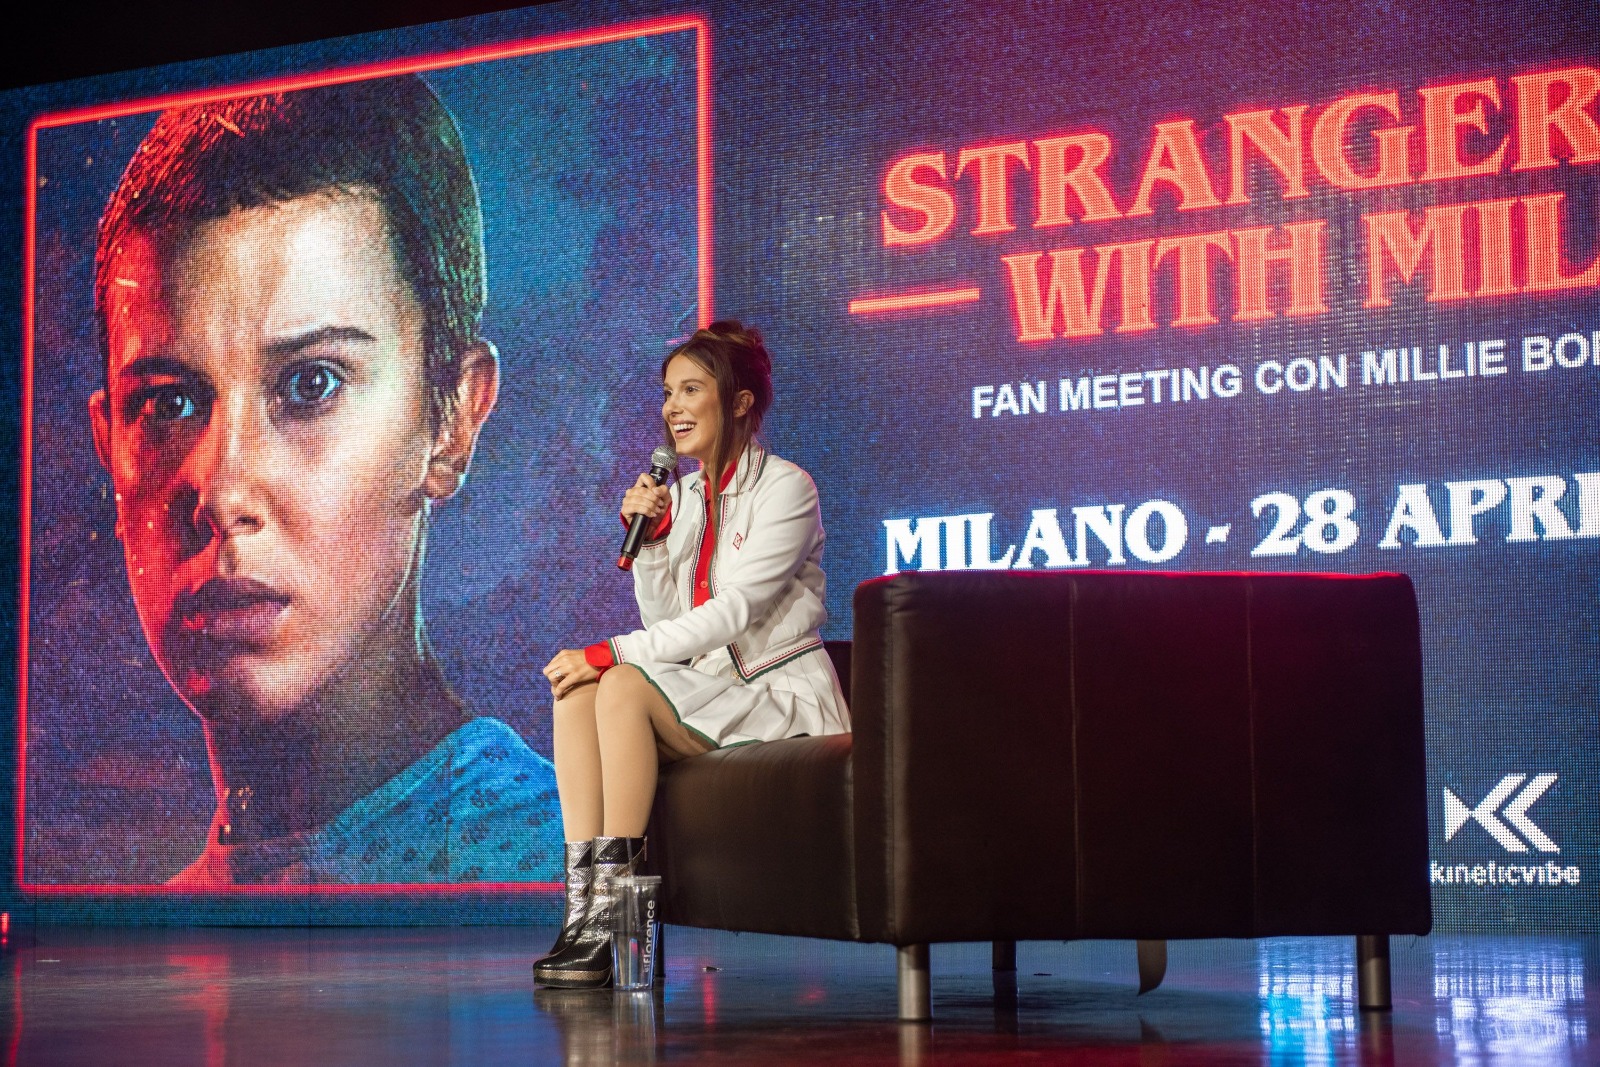 “Stranger Day with Millie”: l’importante fan meeting all’Alcatraz